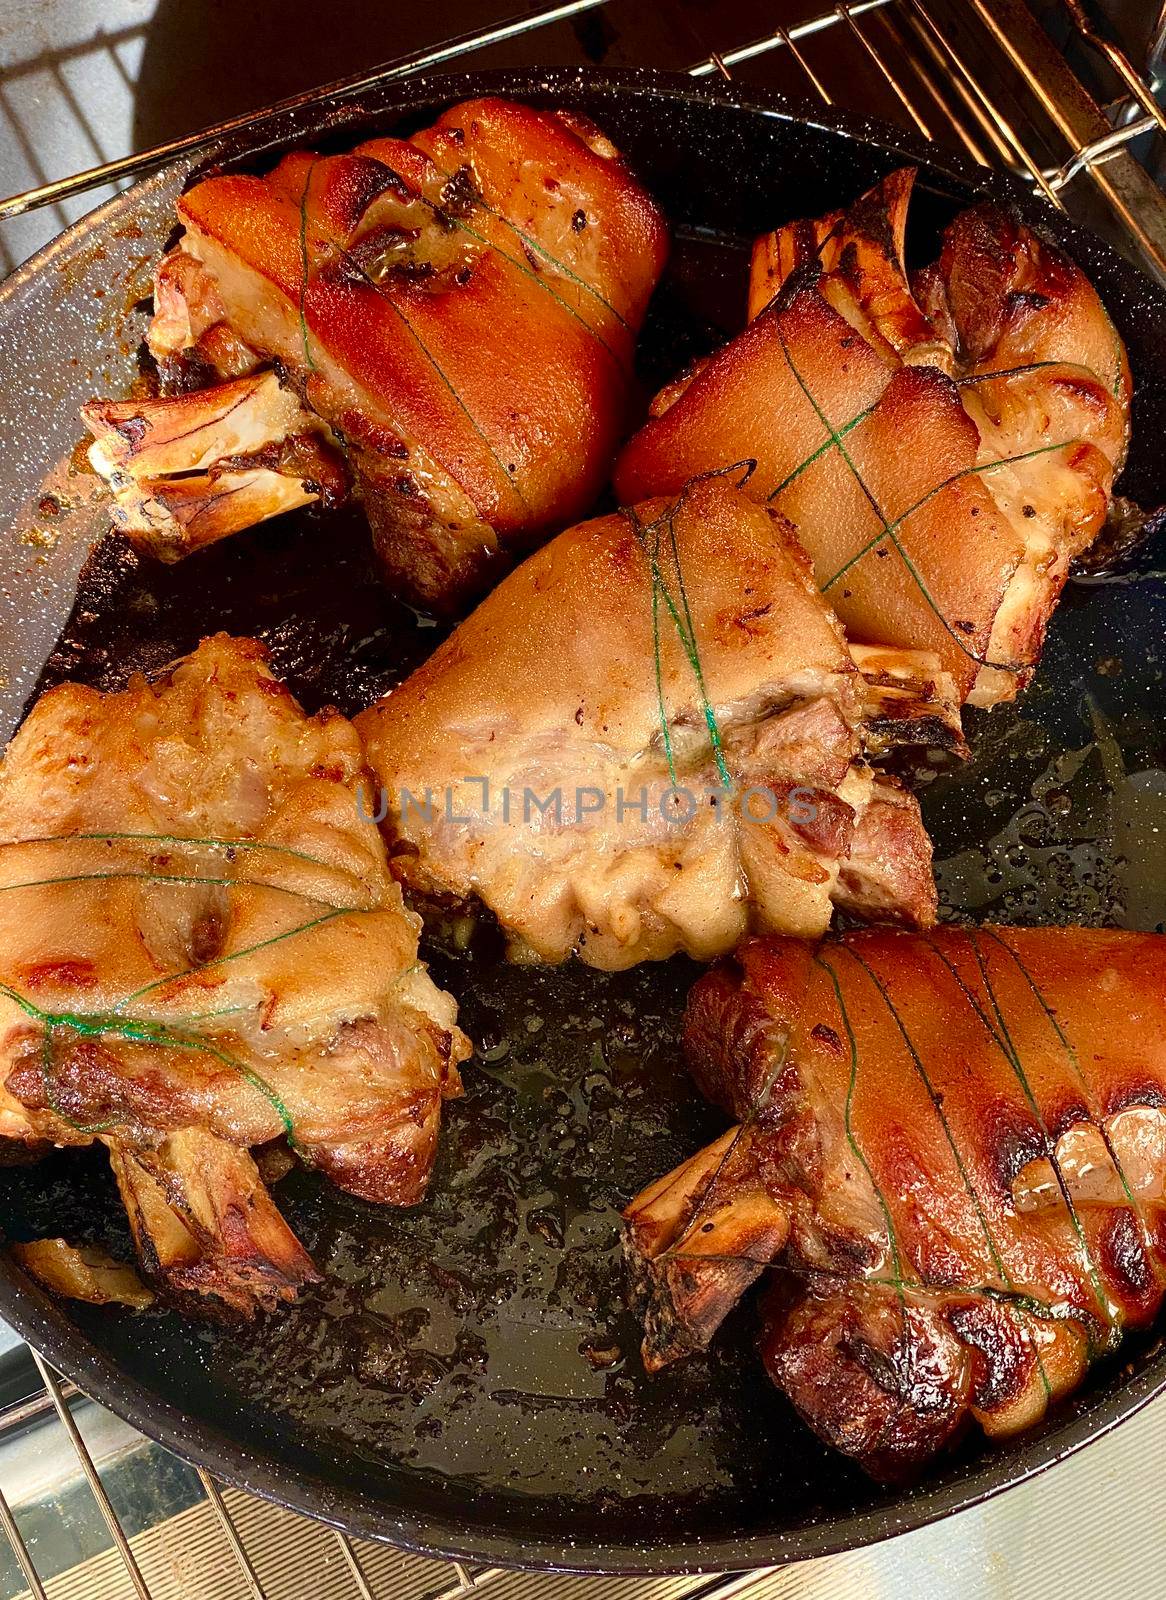 Roasted pork knuckles or legs. German traditional dish